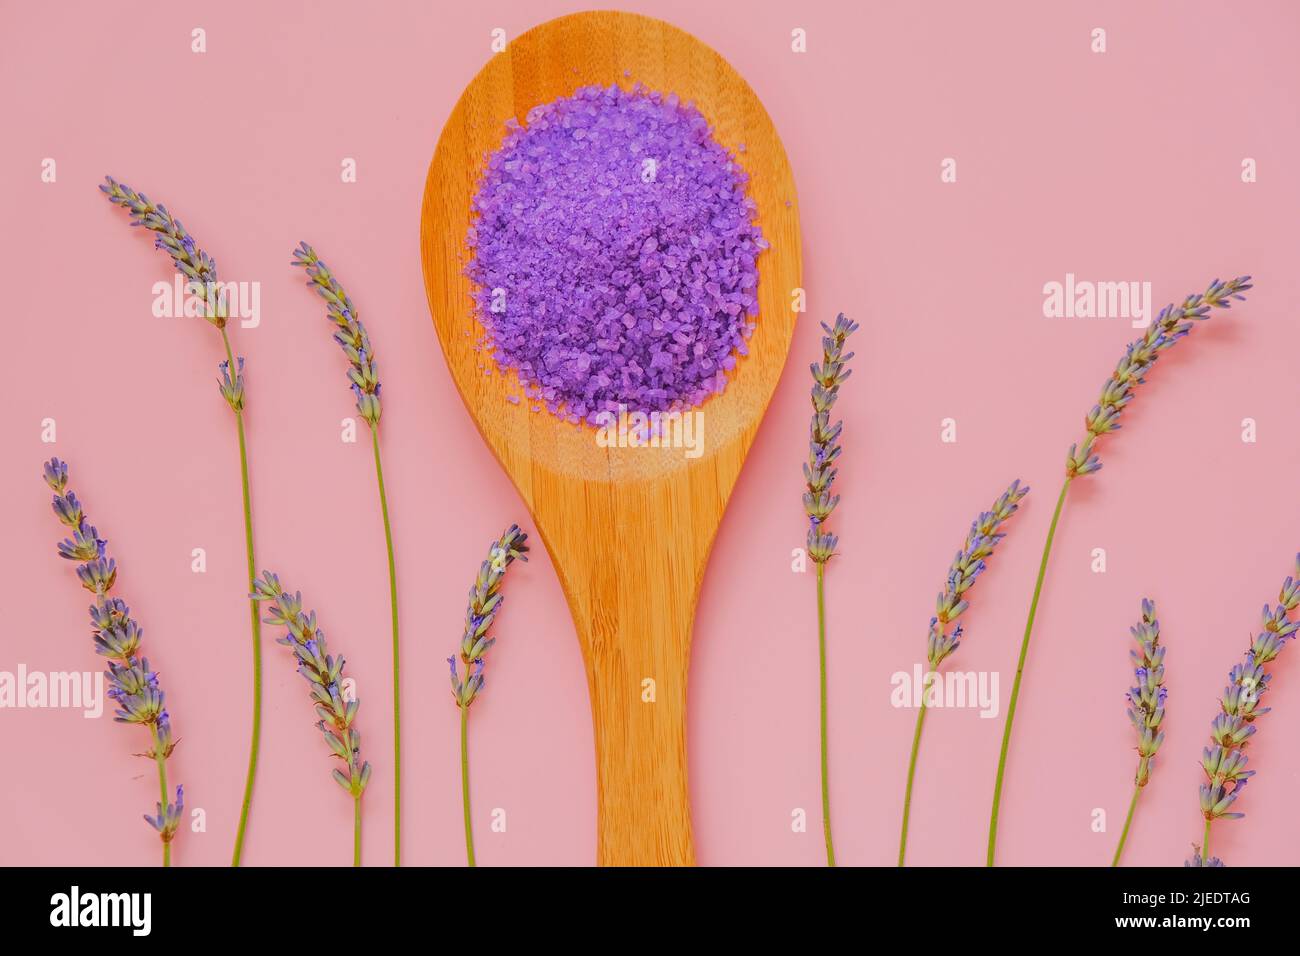 lavender salt.Cosmetic lilac salt with lavender extract in wooden spoon and lavender flowers on a pink background.purple bath salt.Aromatherapy and Stock Photo